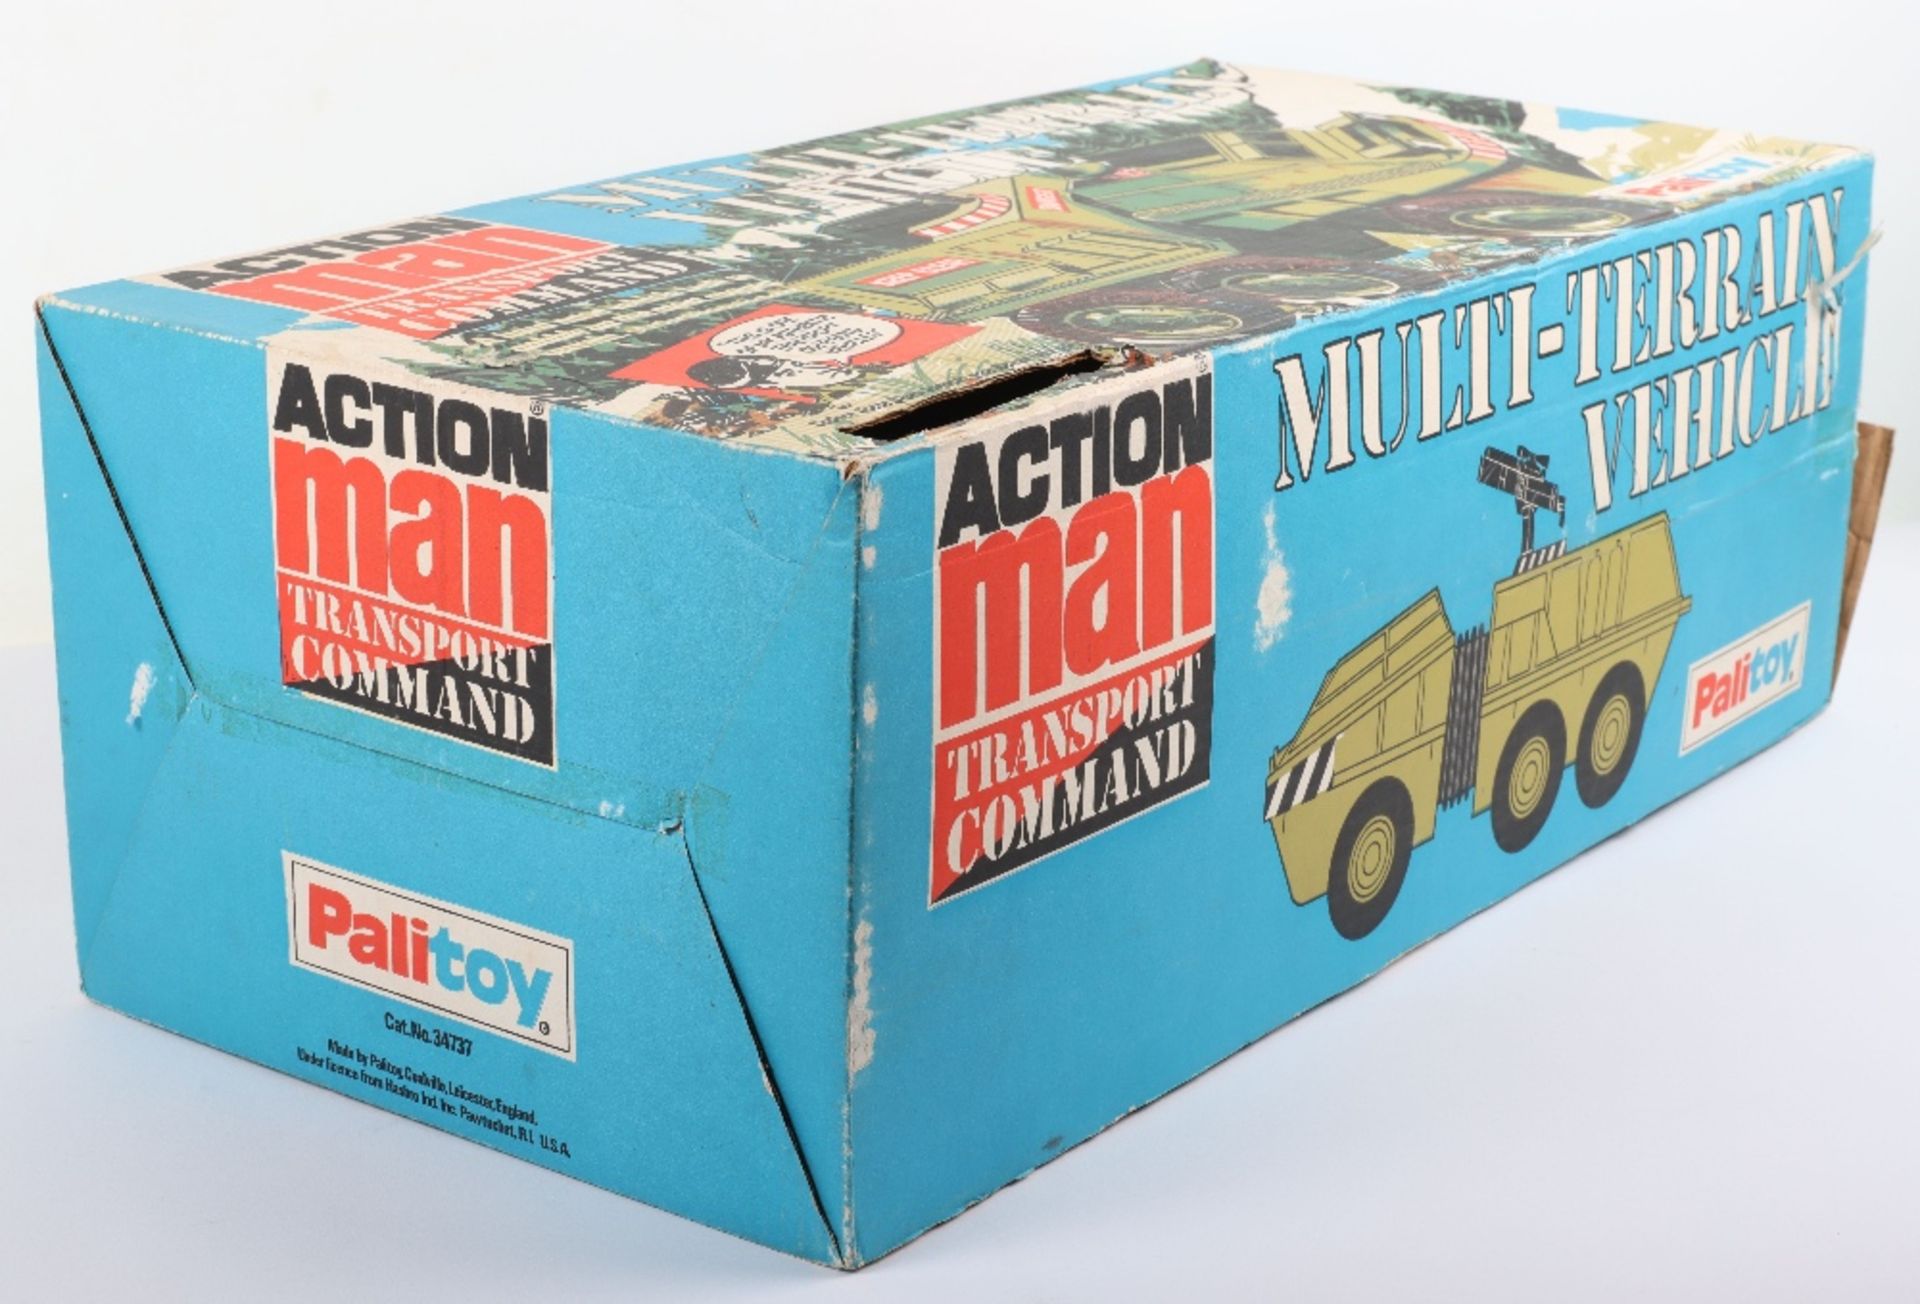 Boxed Original Palitoy Action Man Transport Command Multi-Terrain Vehicle - Image 3 of 9